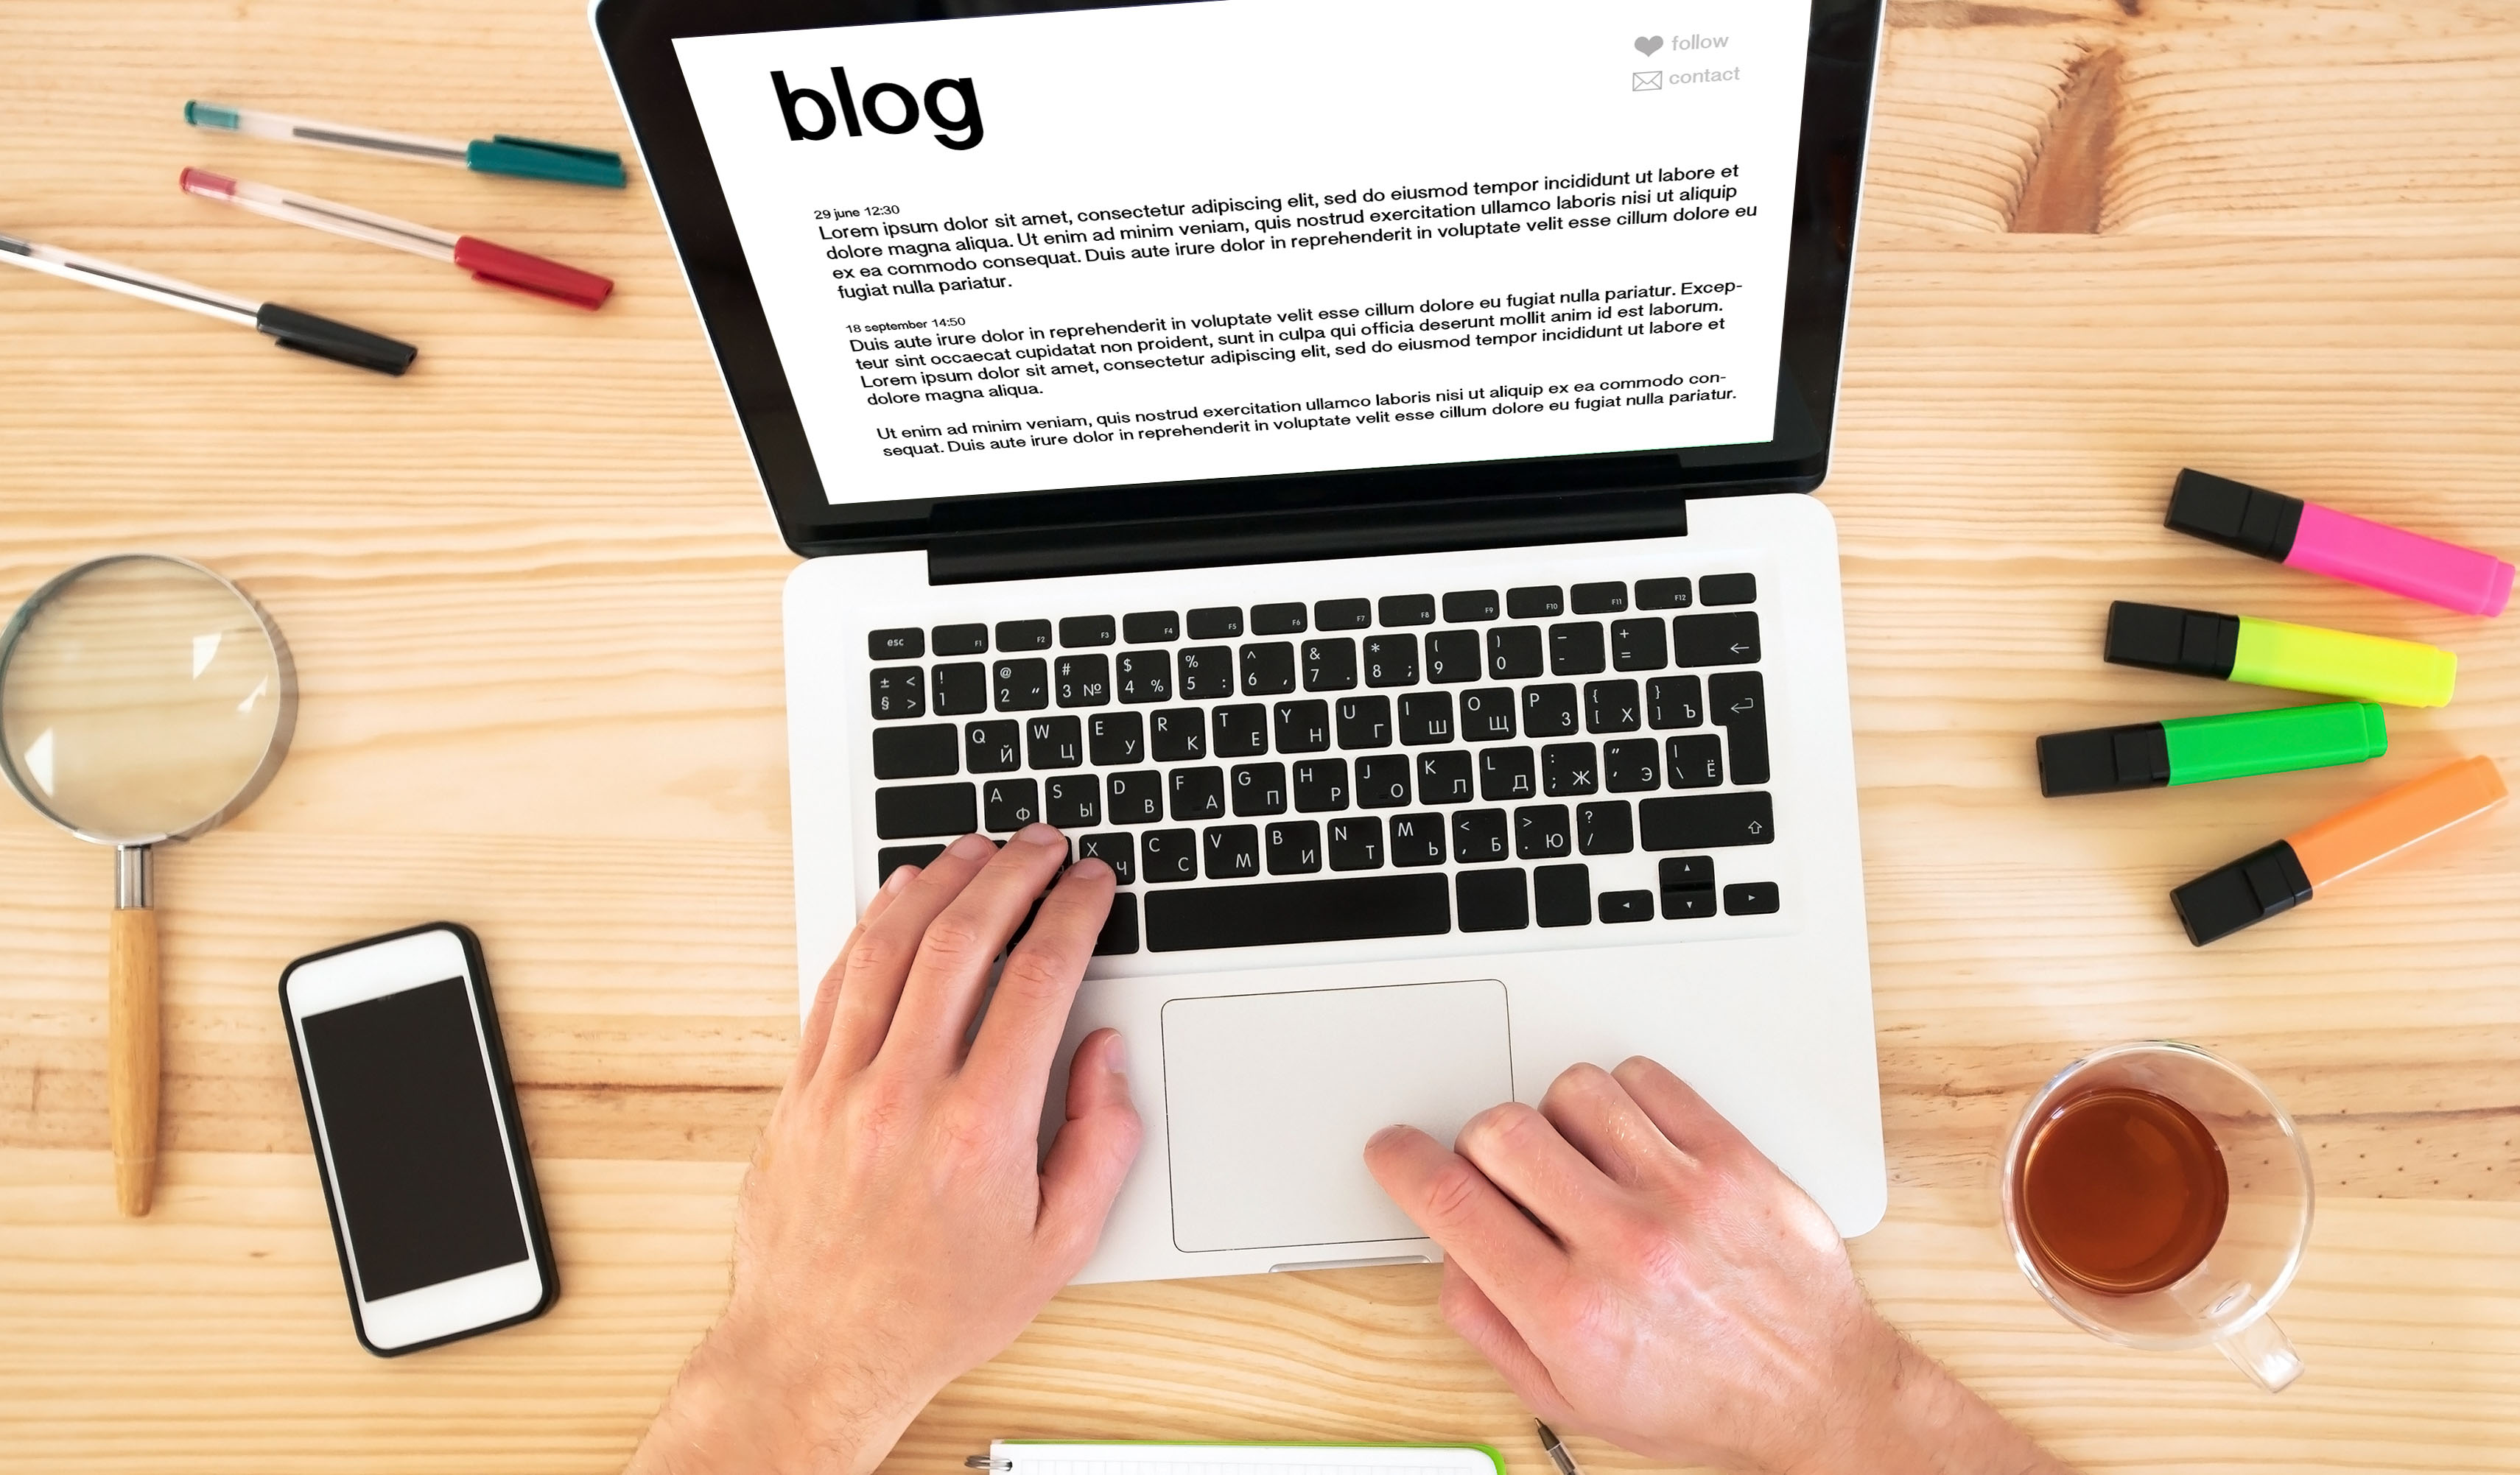 Guidelines for your blog should include